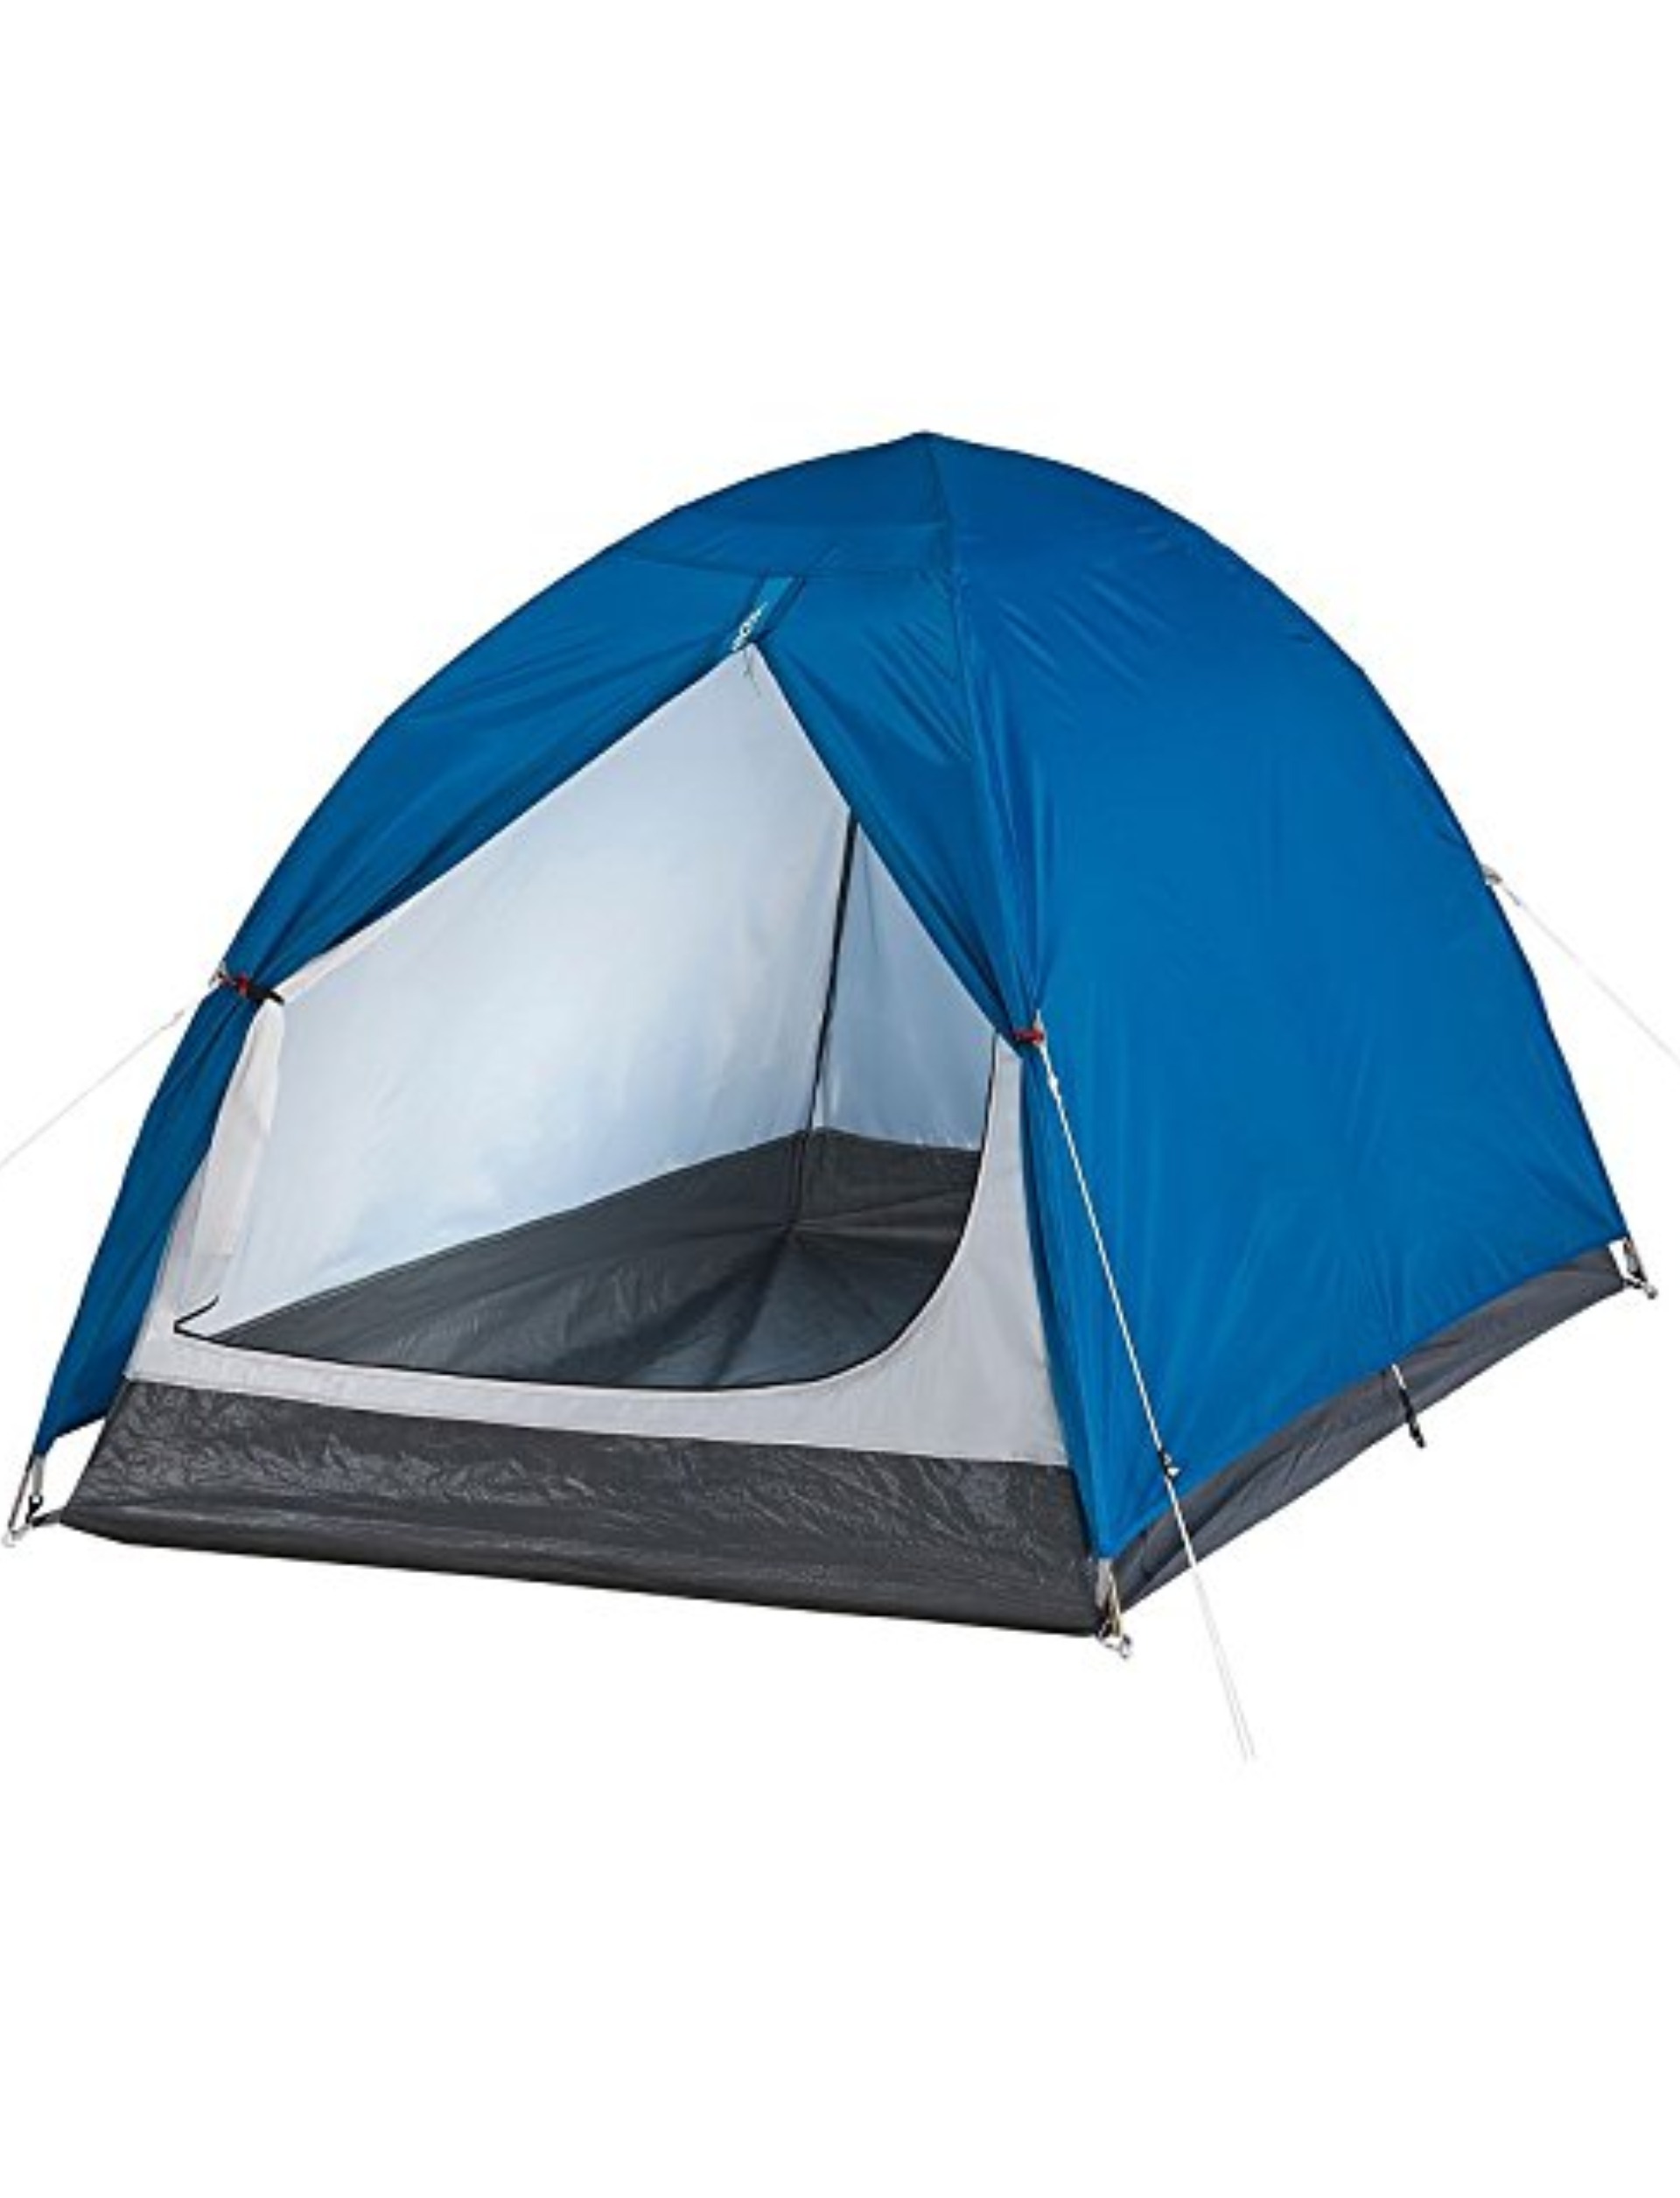 Naturehike Cloud-Up 2 Person Lightweight Backpacking Tent with ...